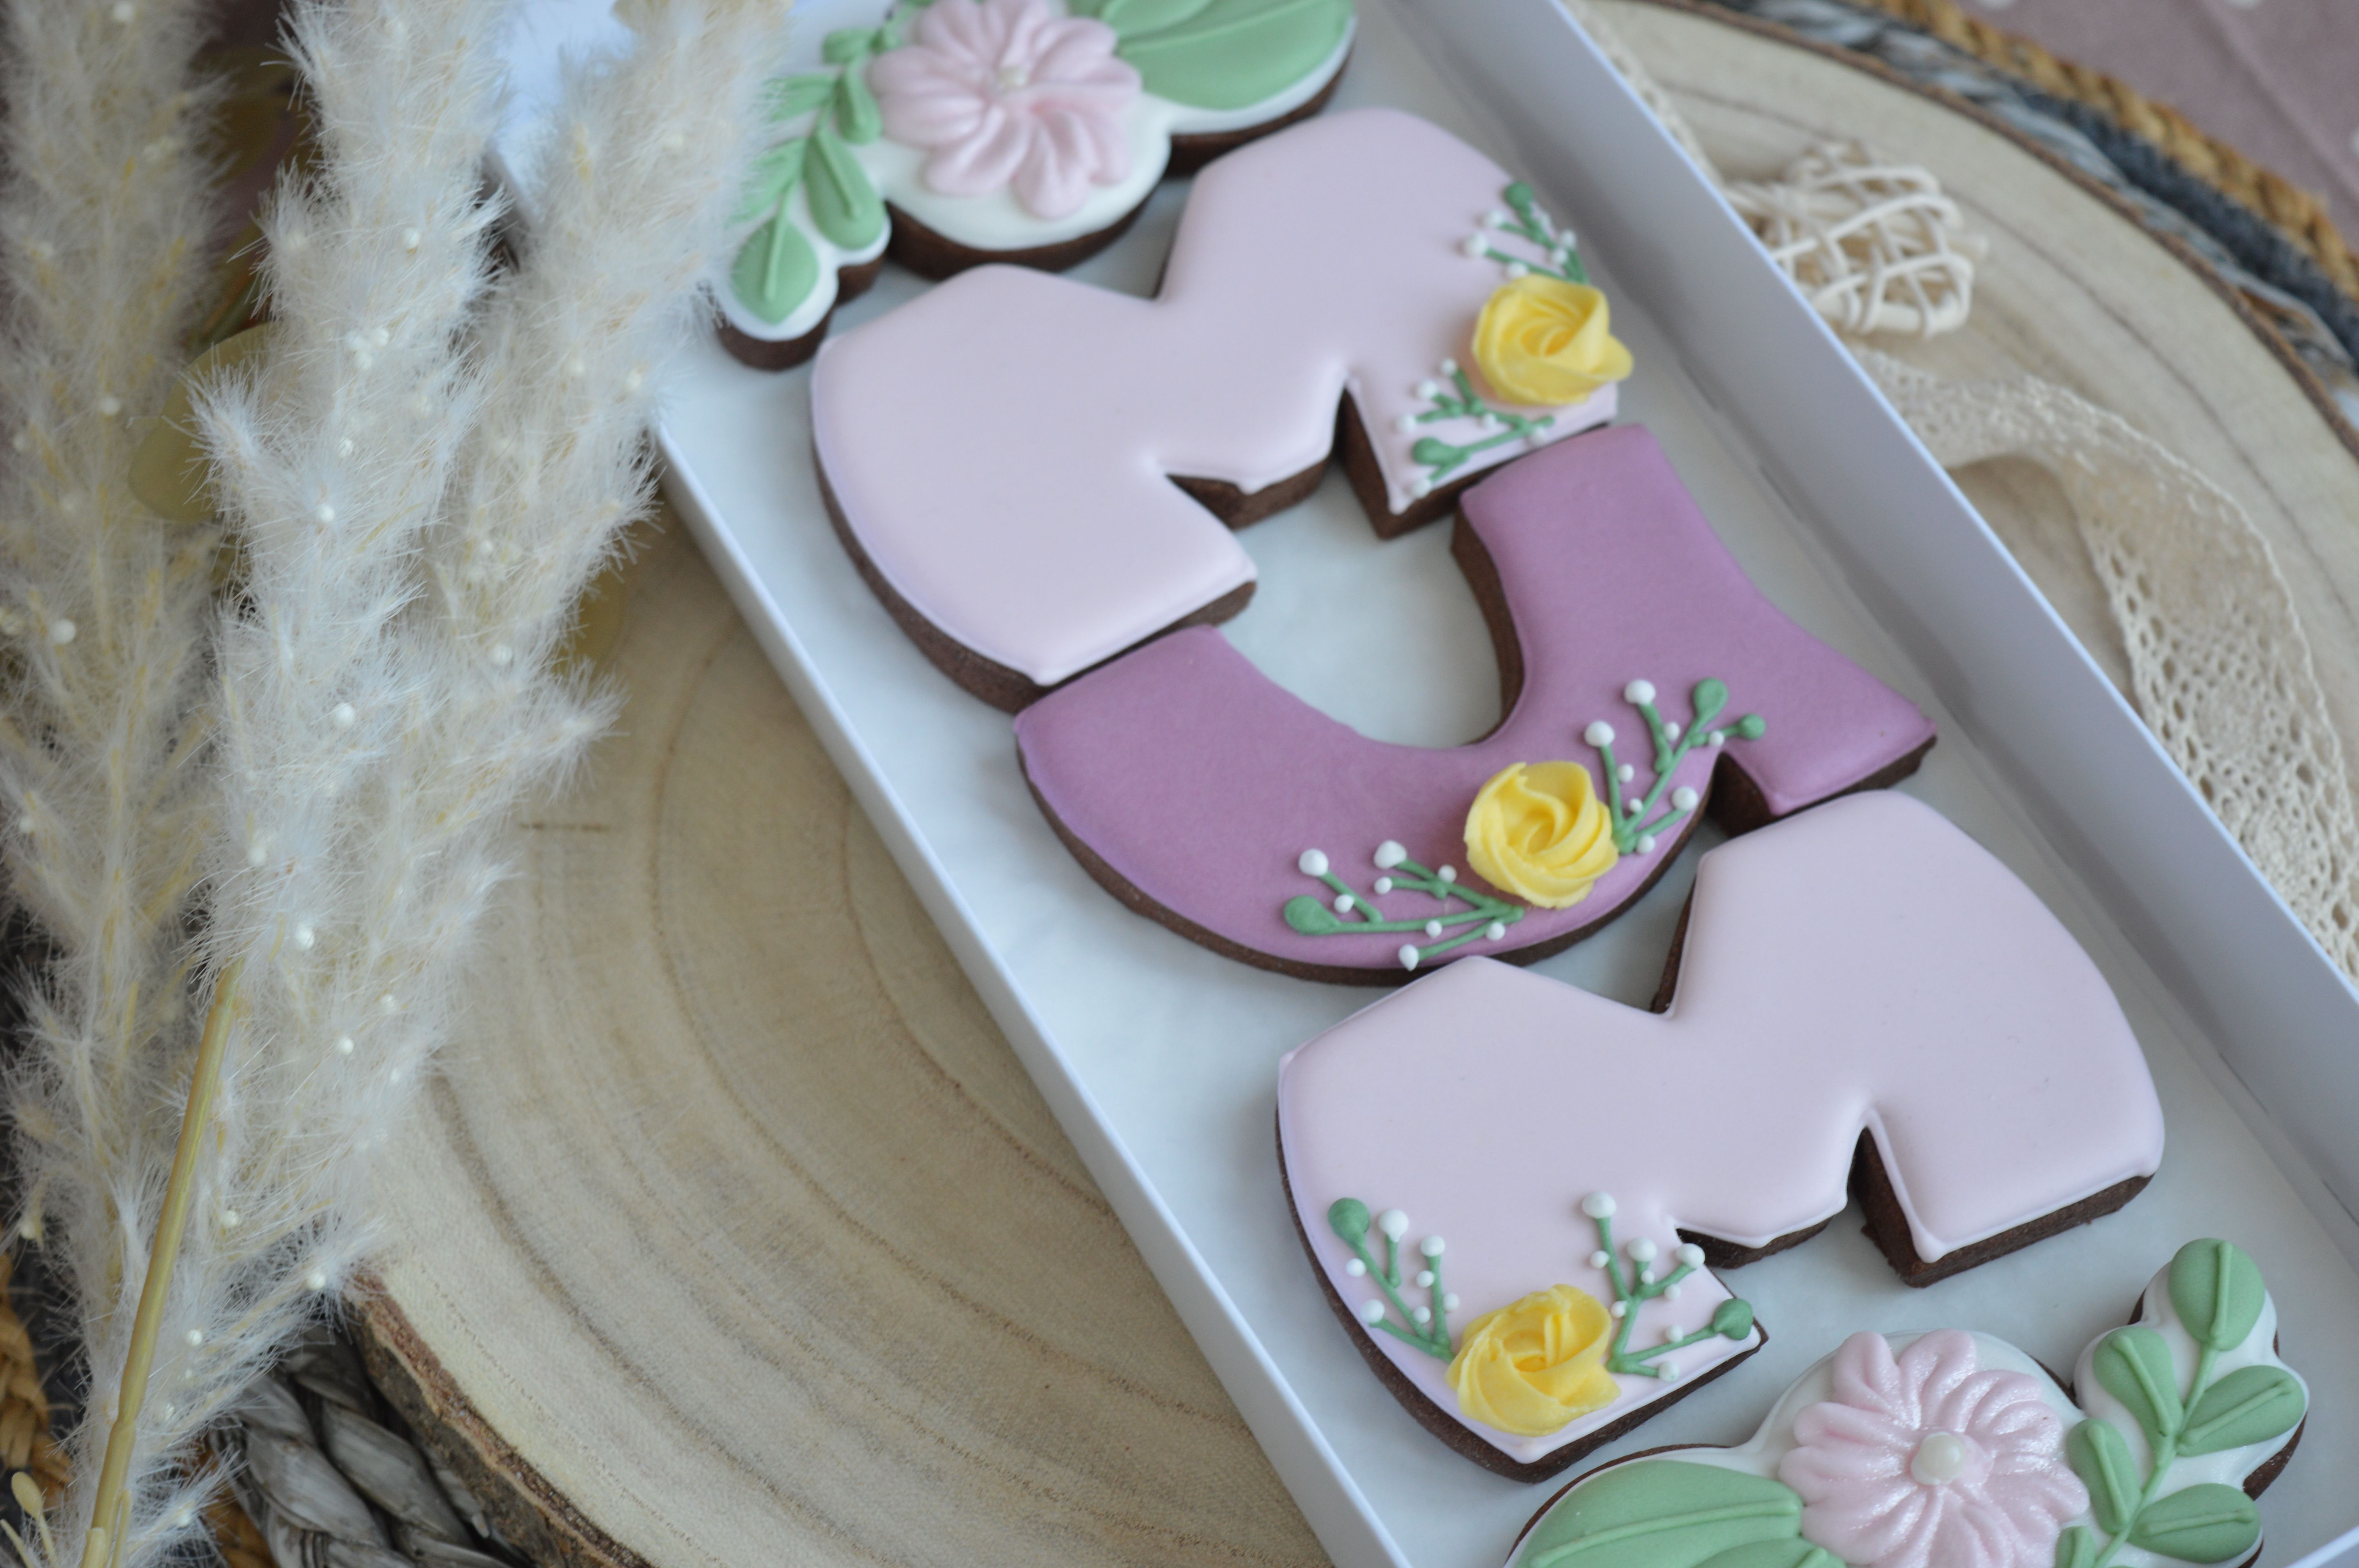 MUM set-Mum-Mum biscuit-Mother's Day-Mother's Day Gift-Birthday Gift-Anniversary gift-Thank you gift-Custom made-Cookies-Biscuits-Party Favor